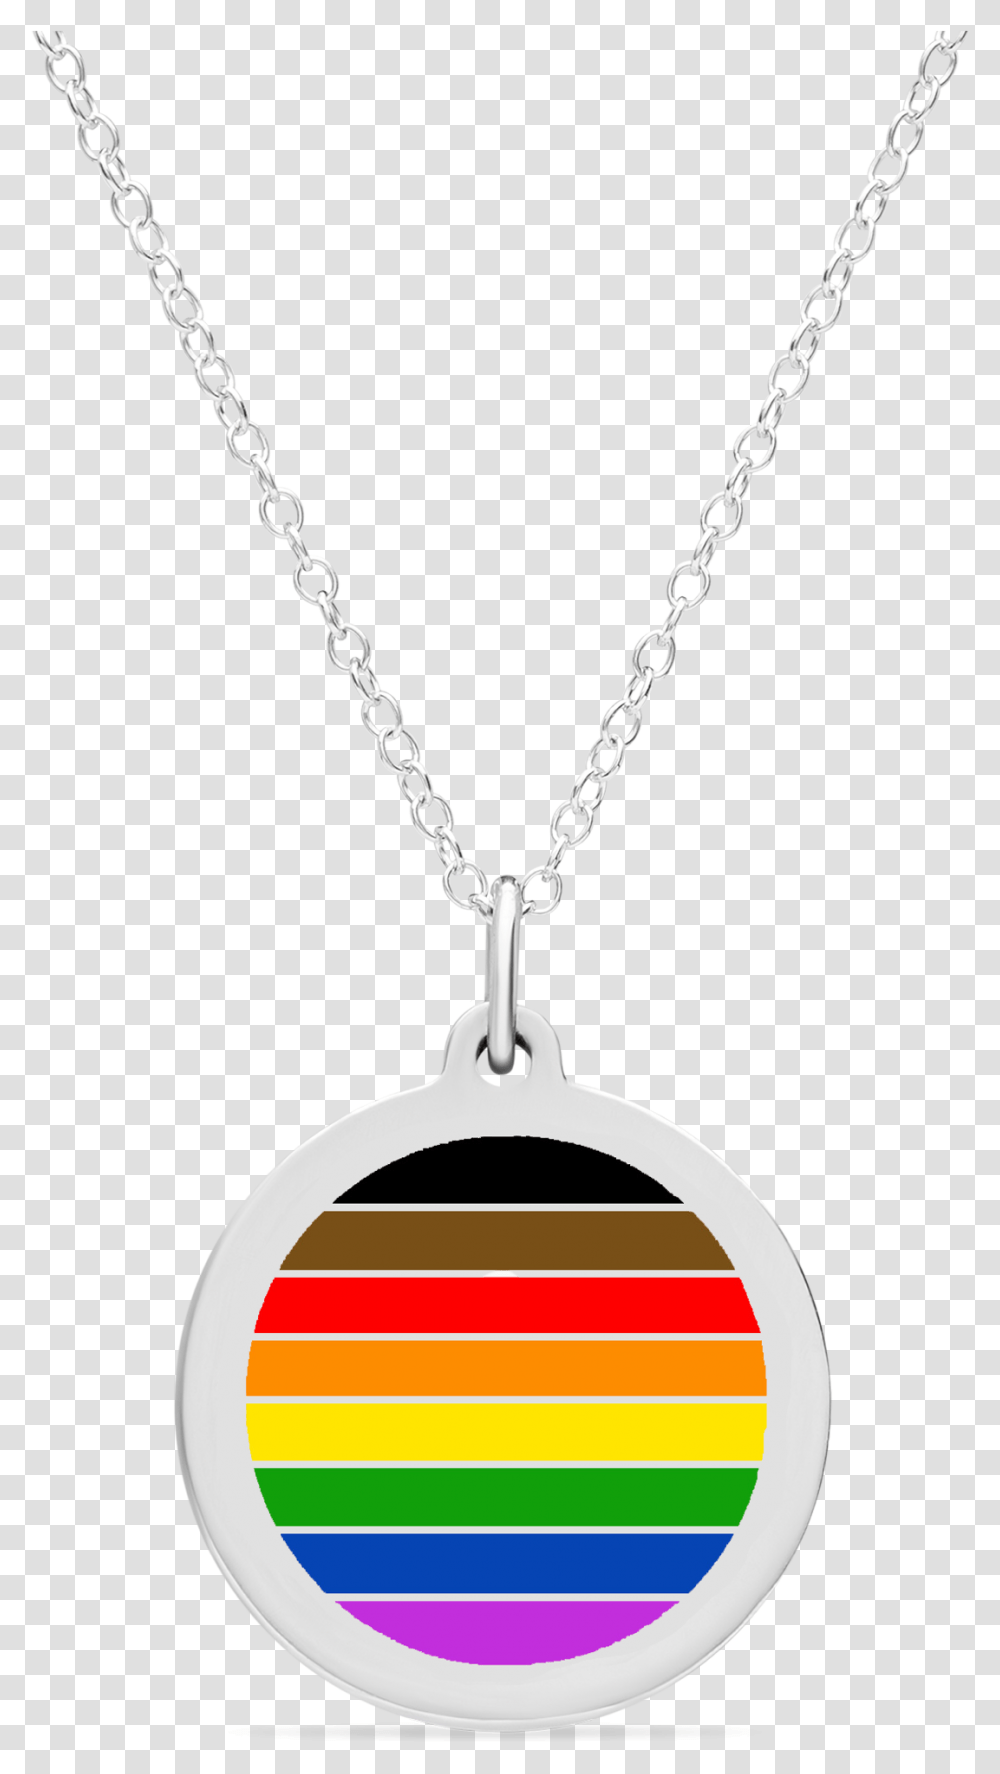 Rainbow Flag Charm In Sterling Silver With Rhodium Plate Solid, Pendant, Locket, Jewelry, Accessories Transparent Png